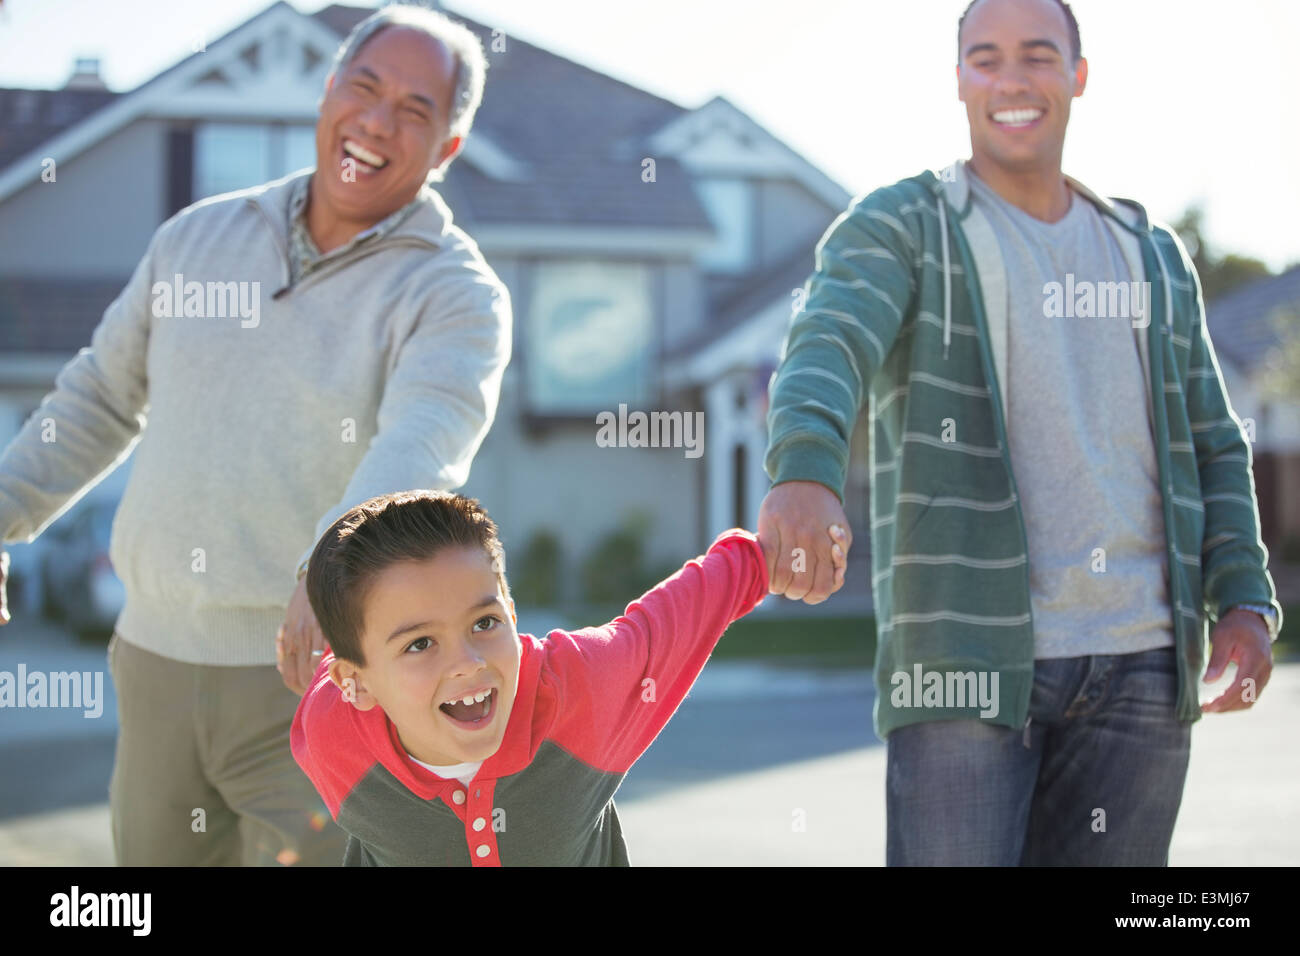 Multi-generation men laughing outdoors Banque D'Images